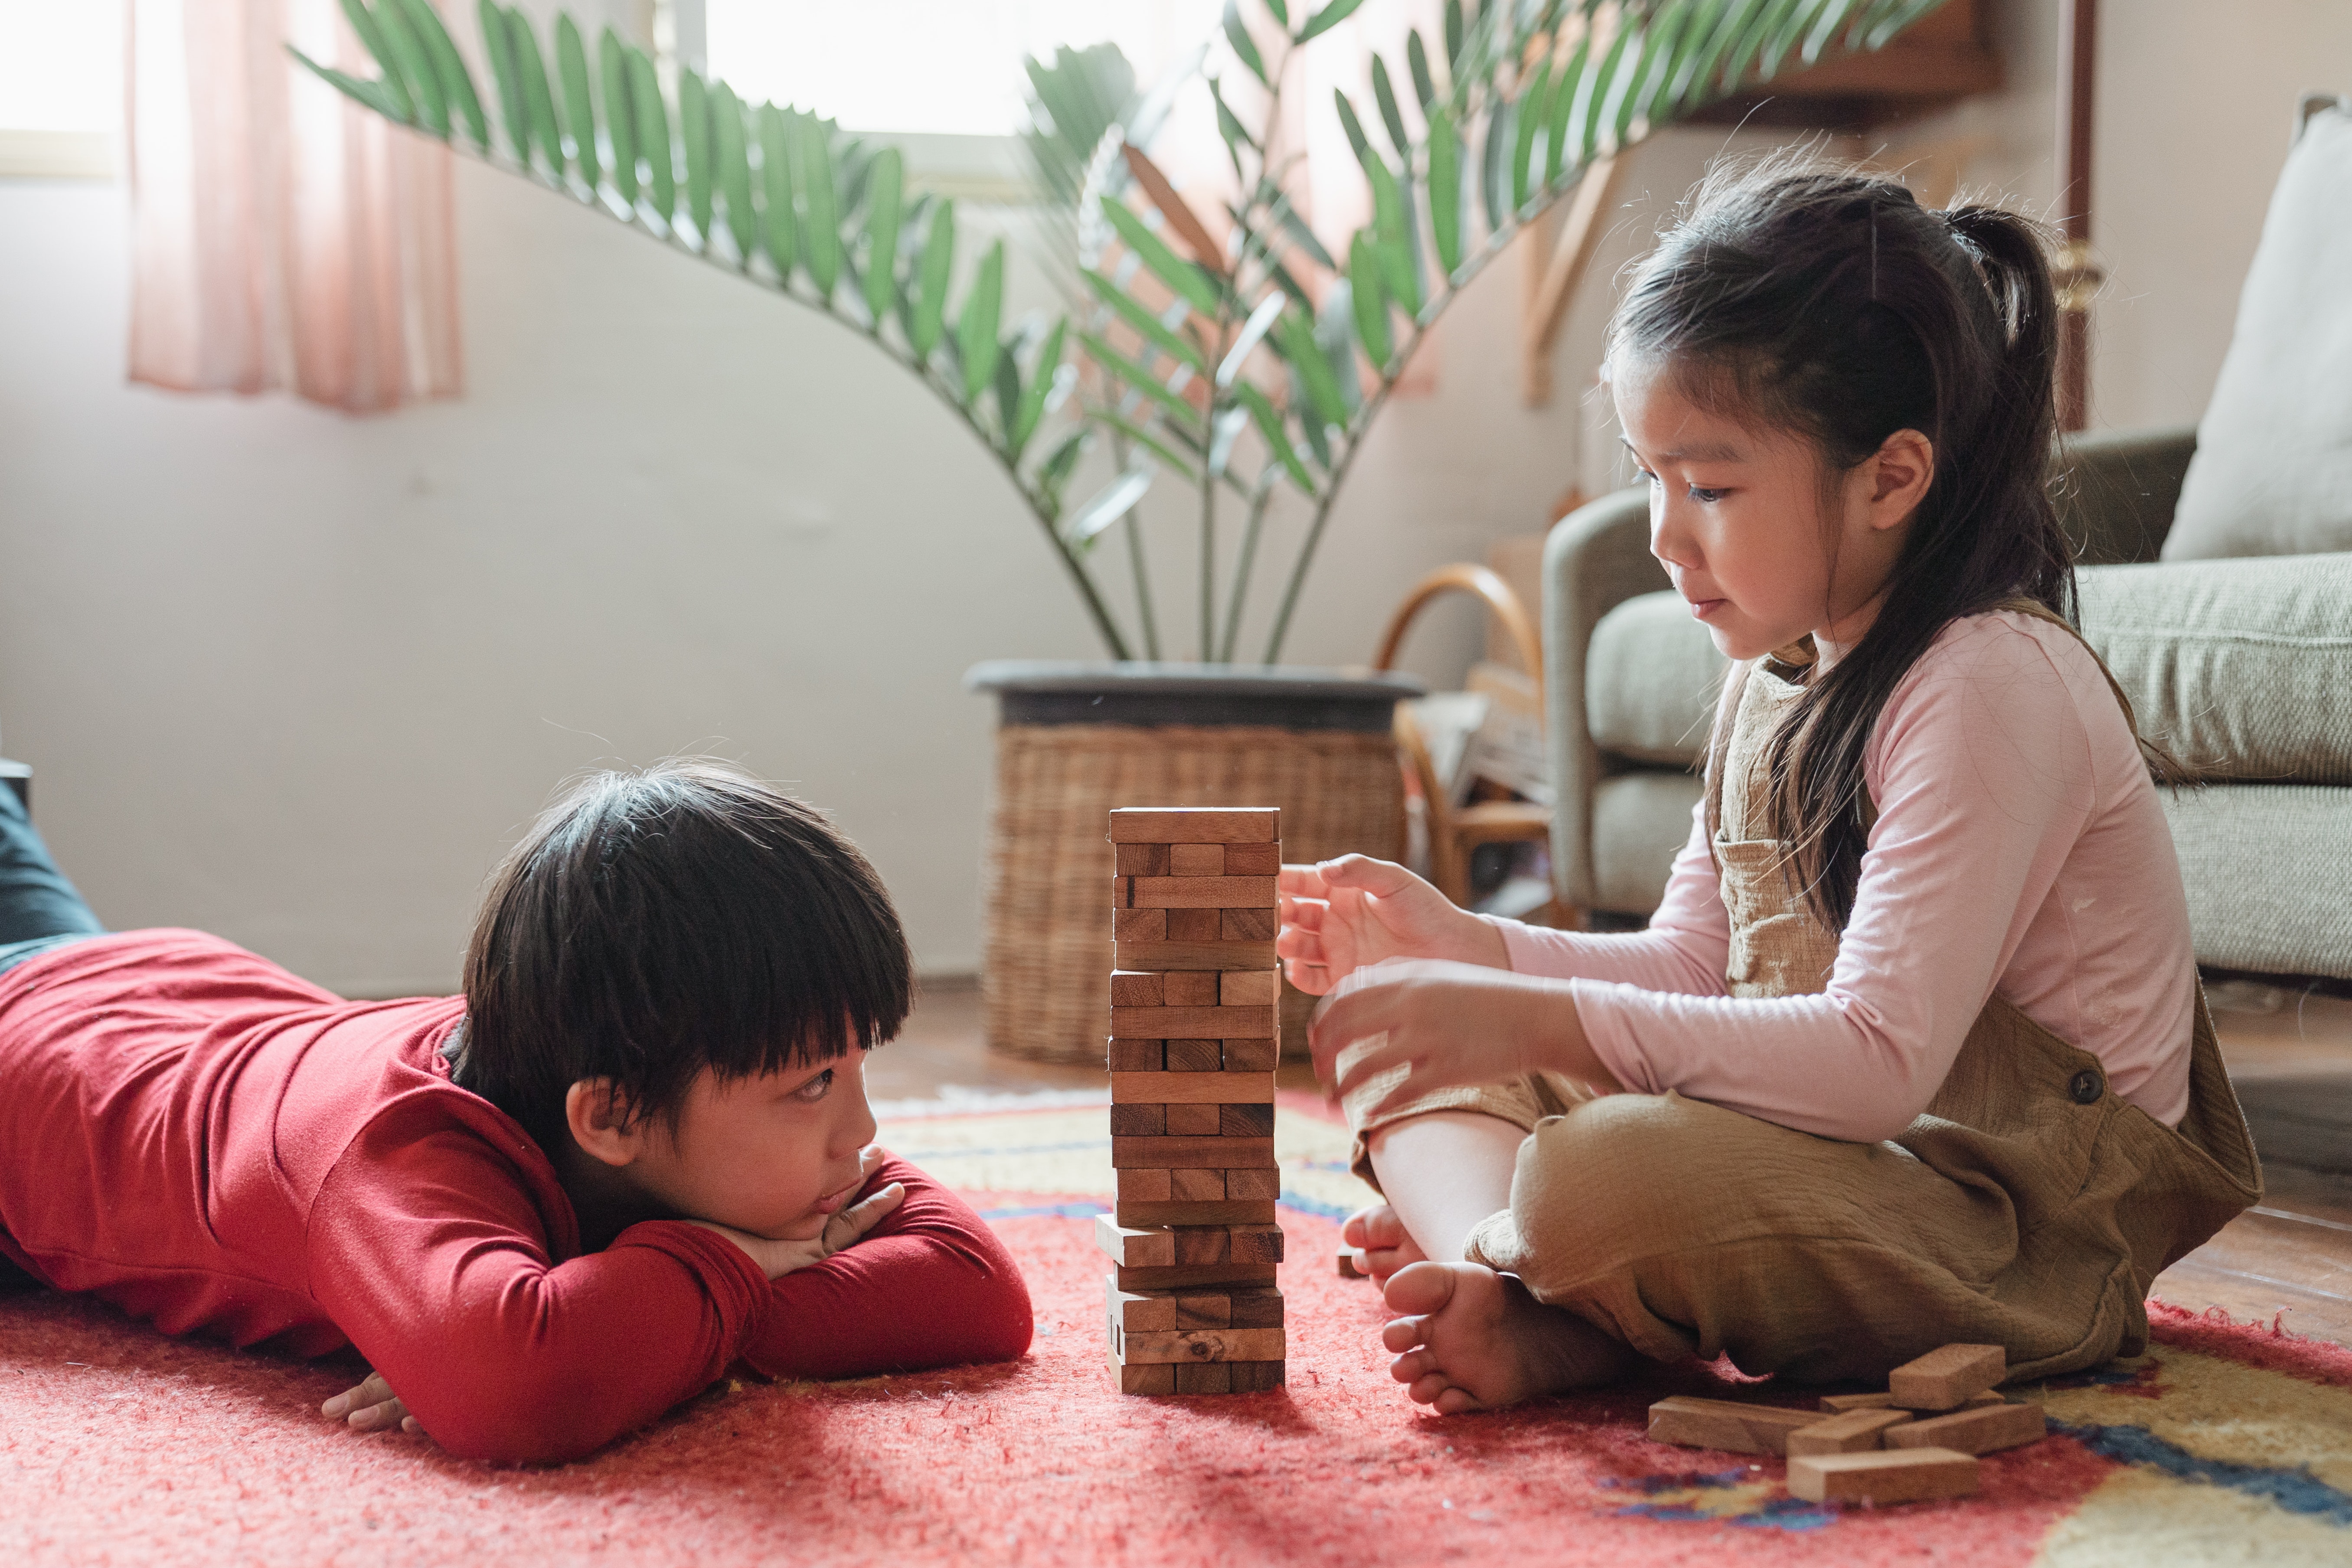 Two children playing on the floor with blocks